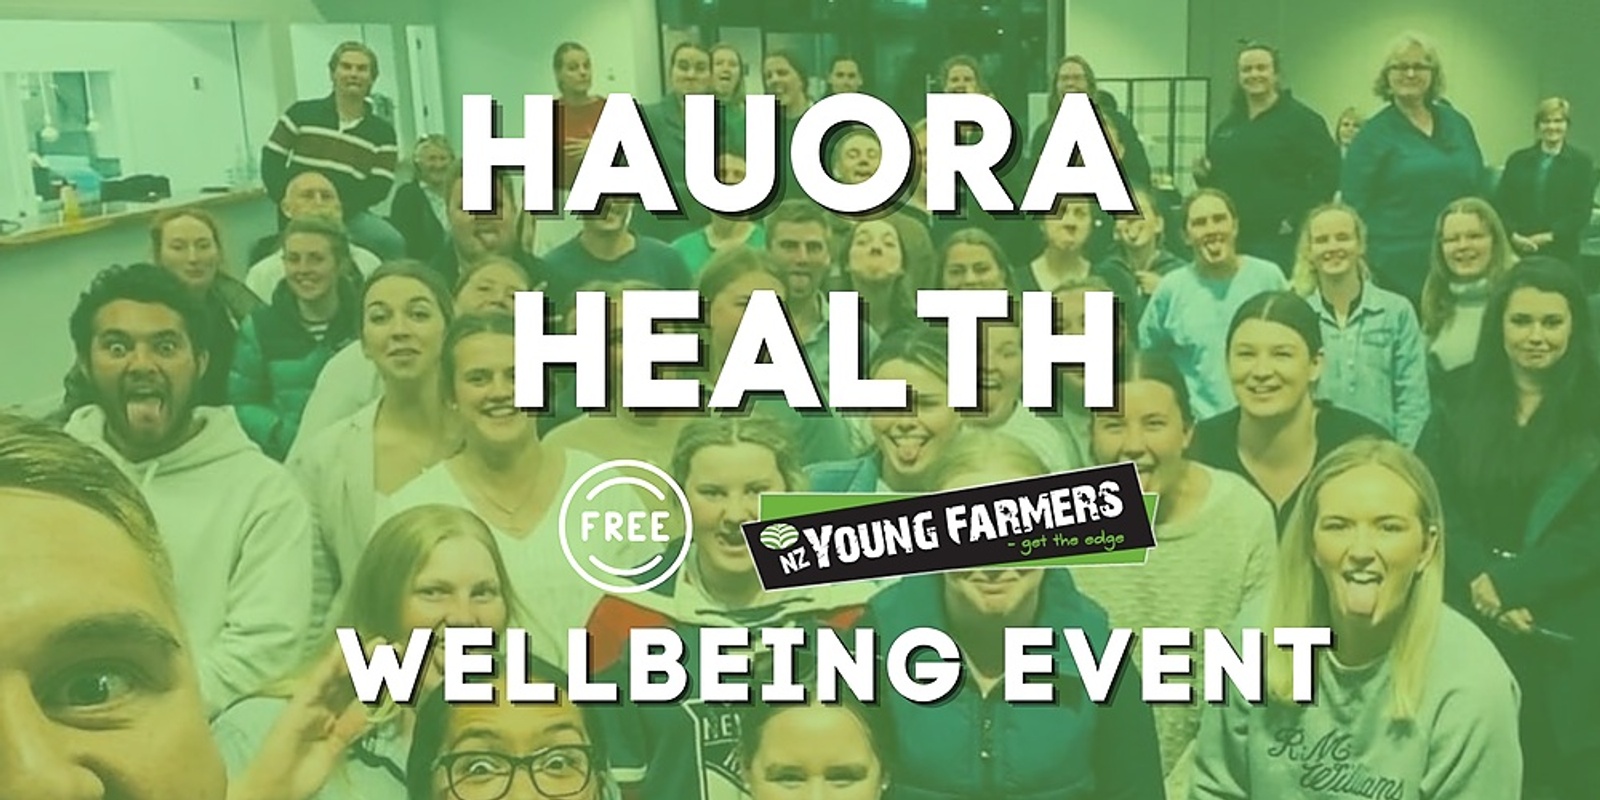 Banner image for Hauora Health & Wellbeing Event